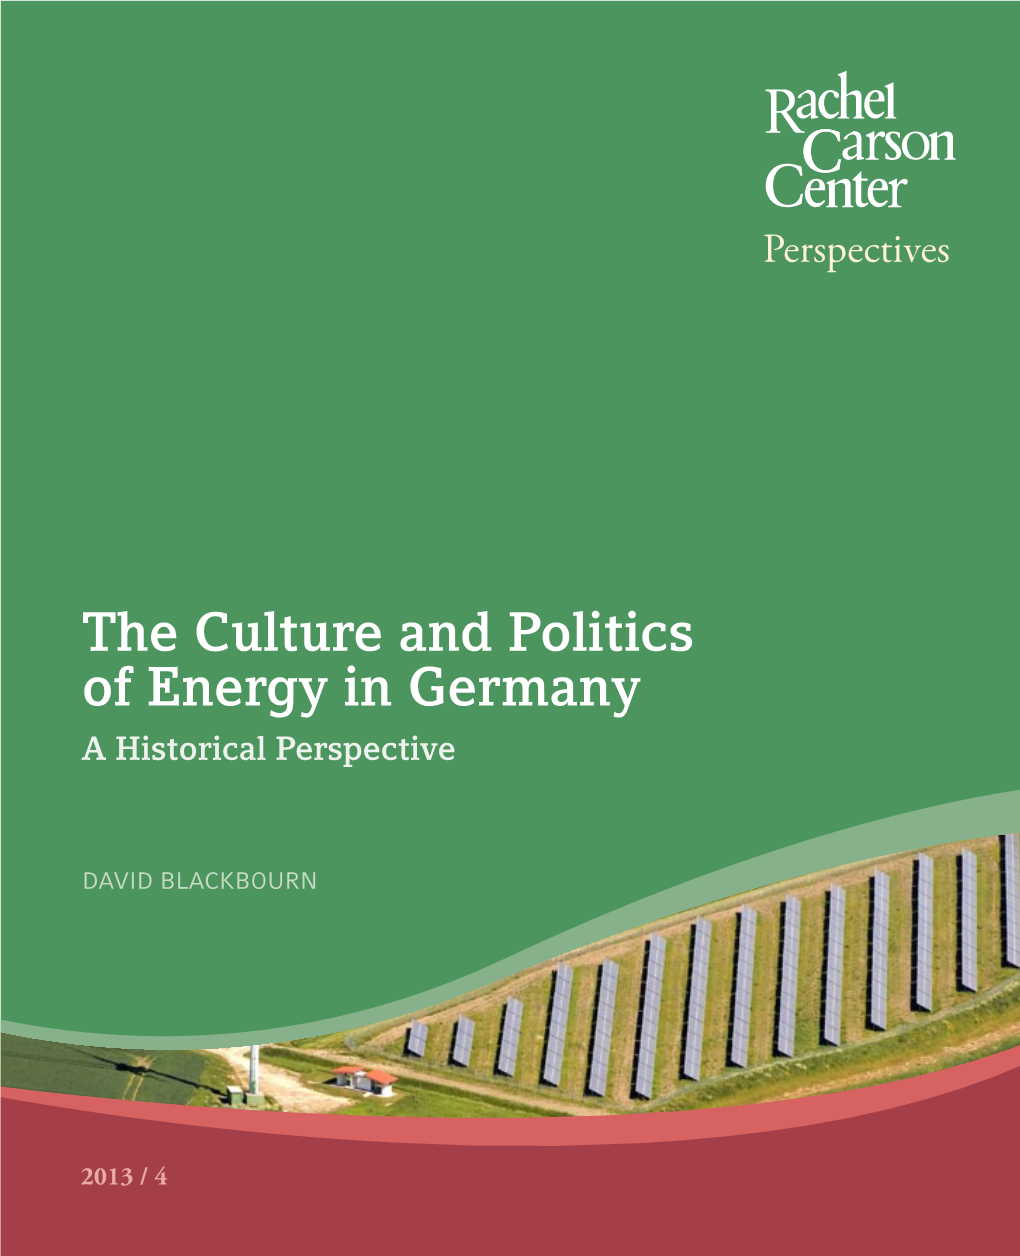 The Culture and Politics of Energy in Germany a Historical Perspective